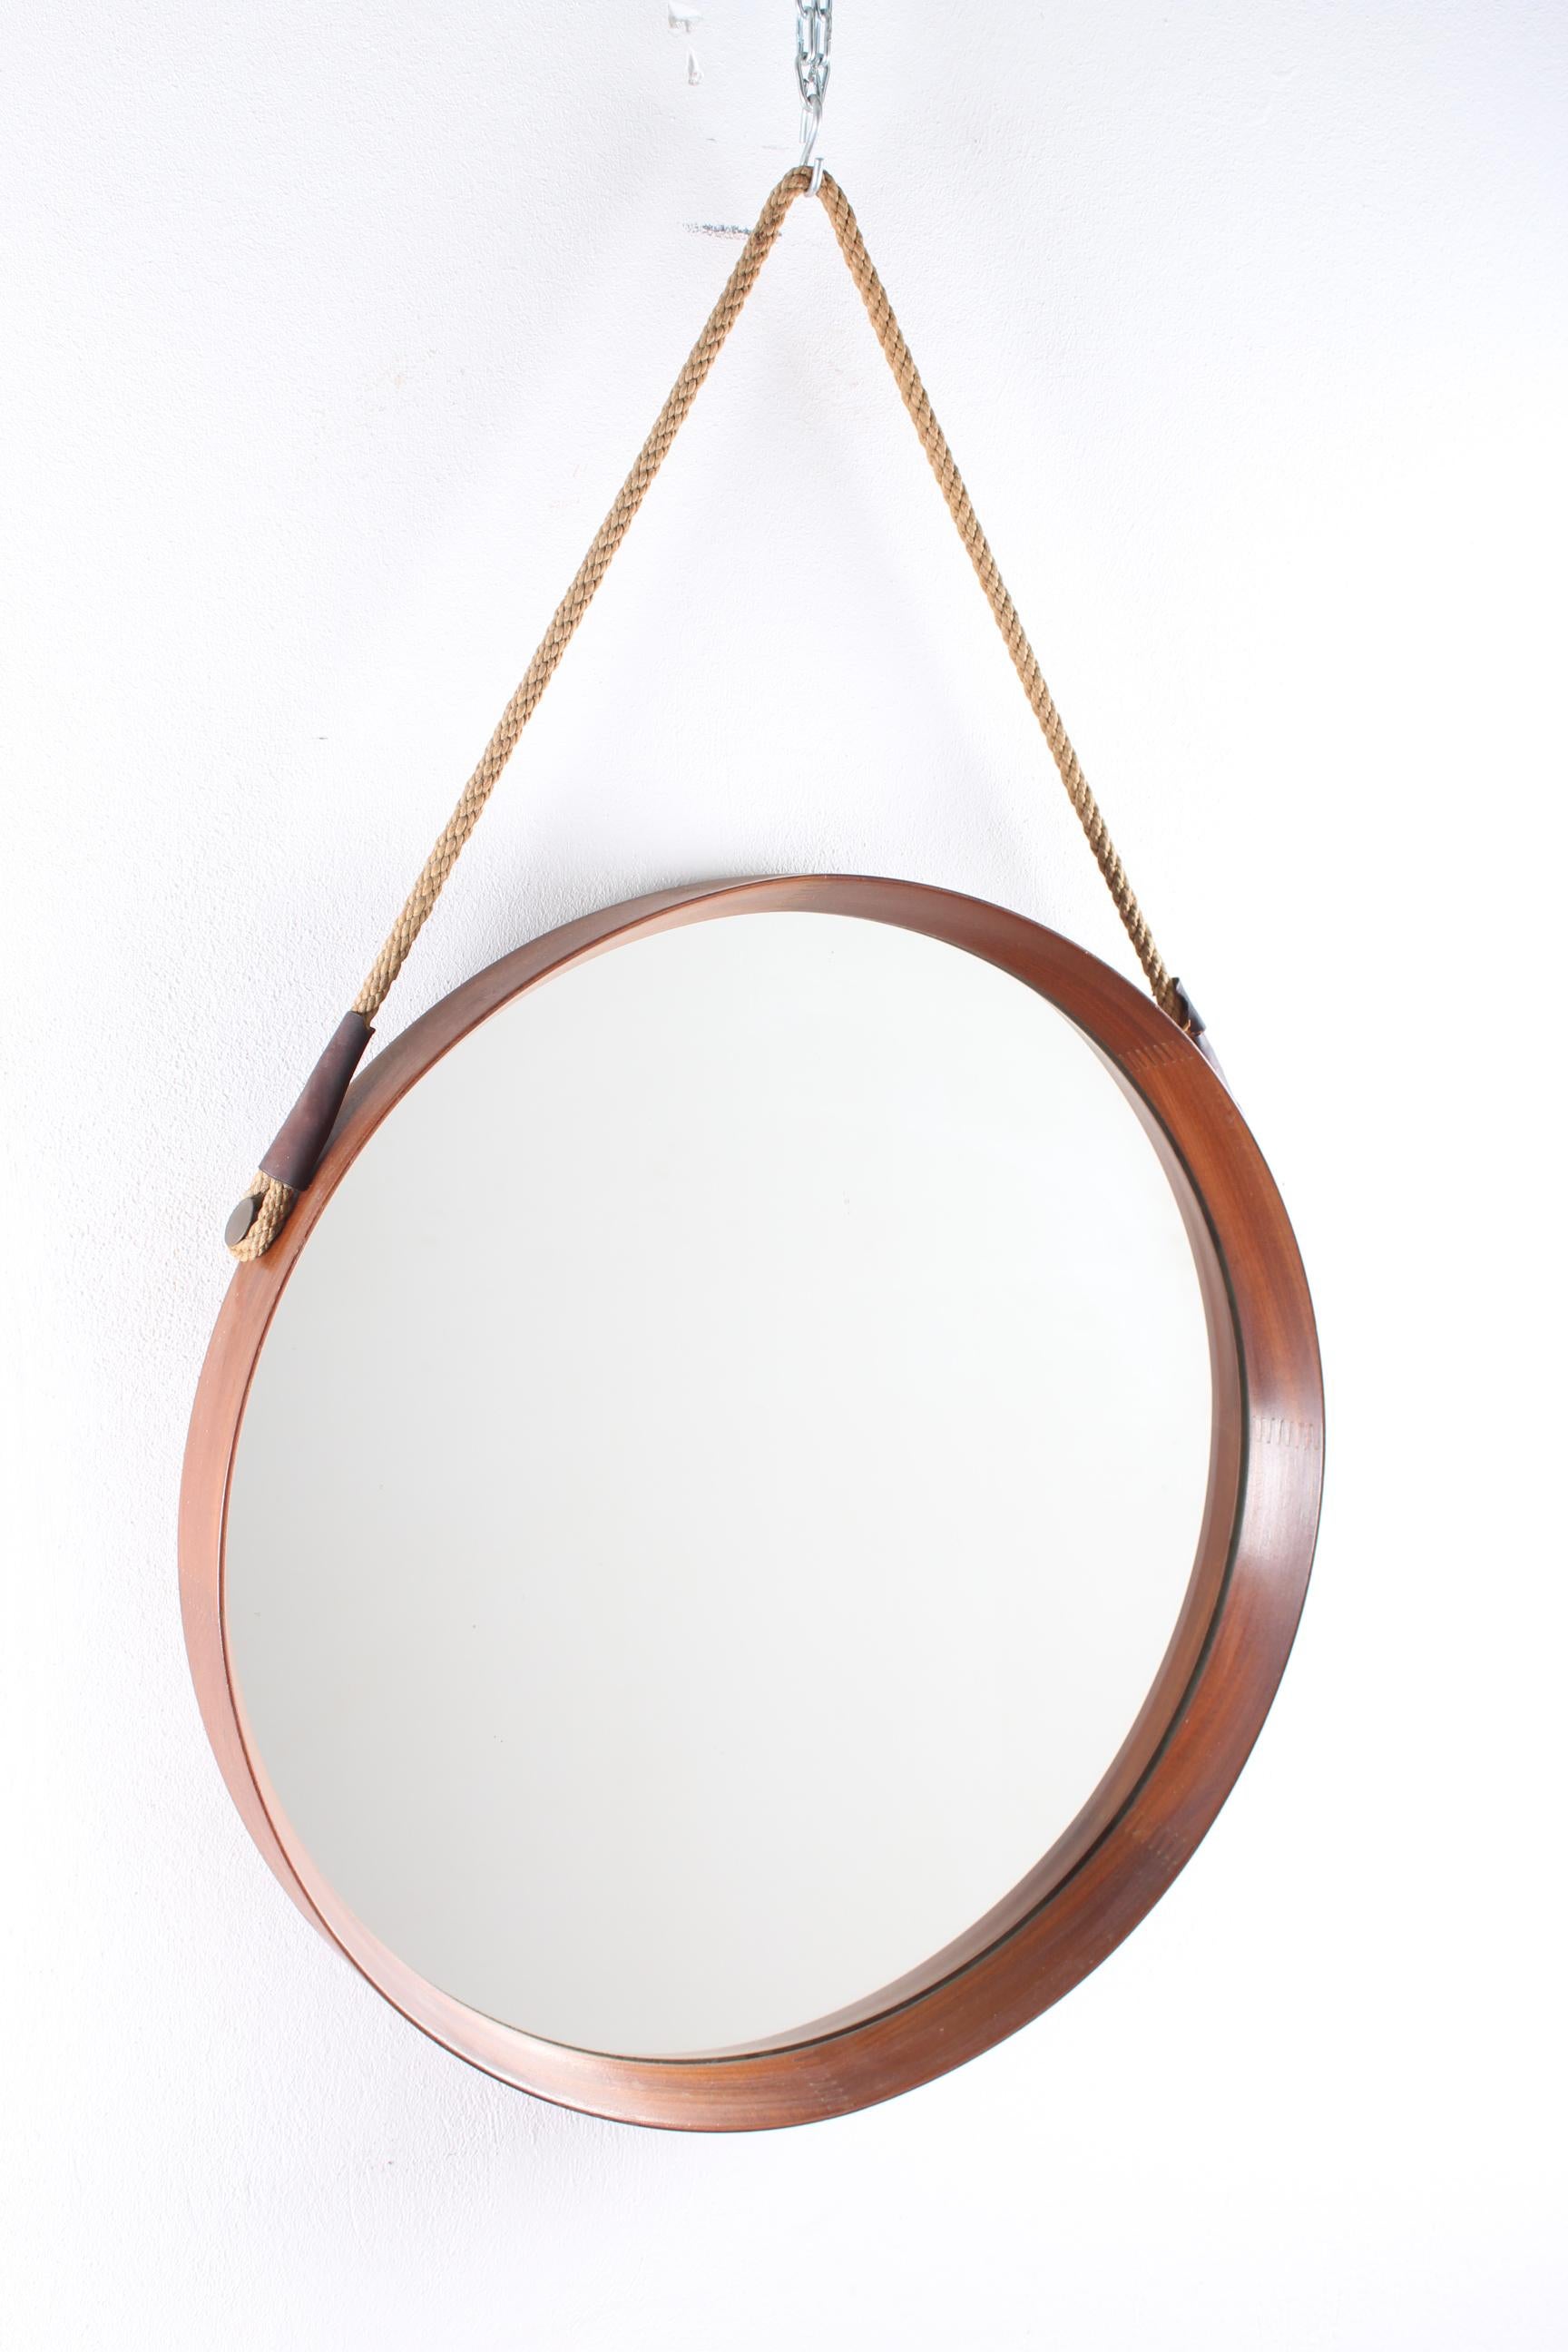 Round mirror with dark brown frame, Italy, 1960s.
Wear consistent with age and use.